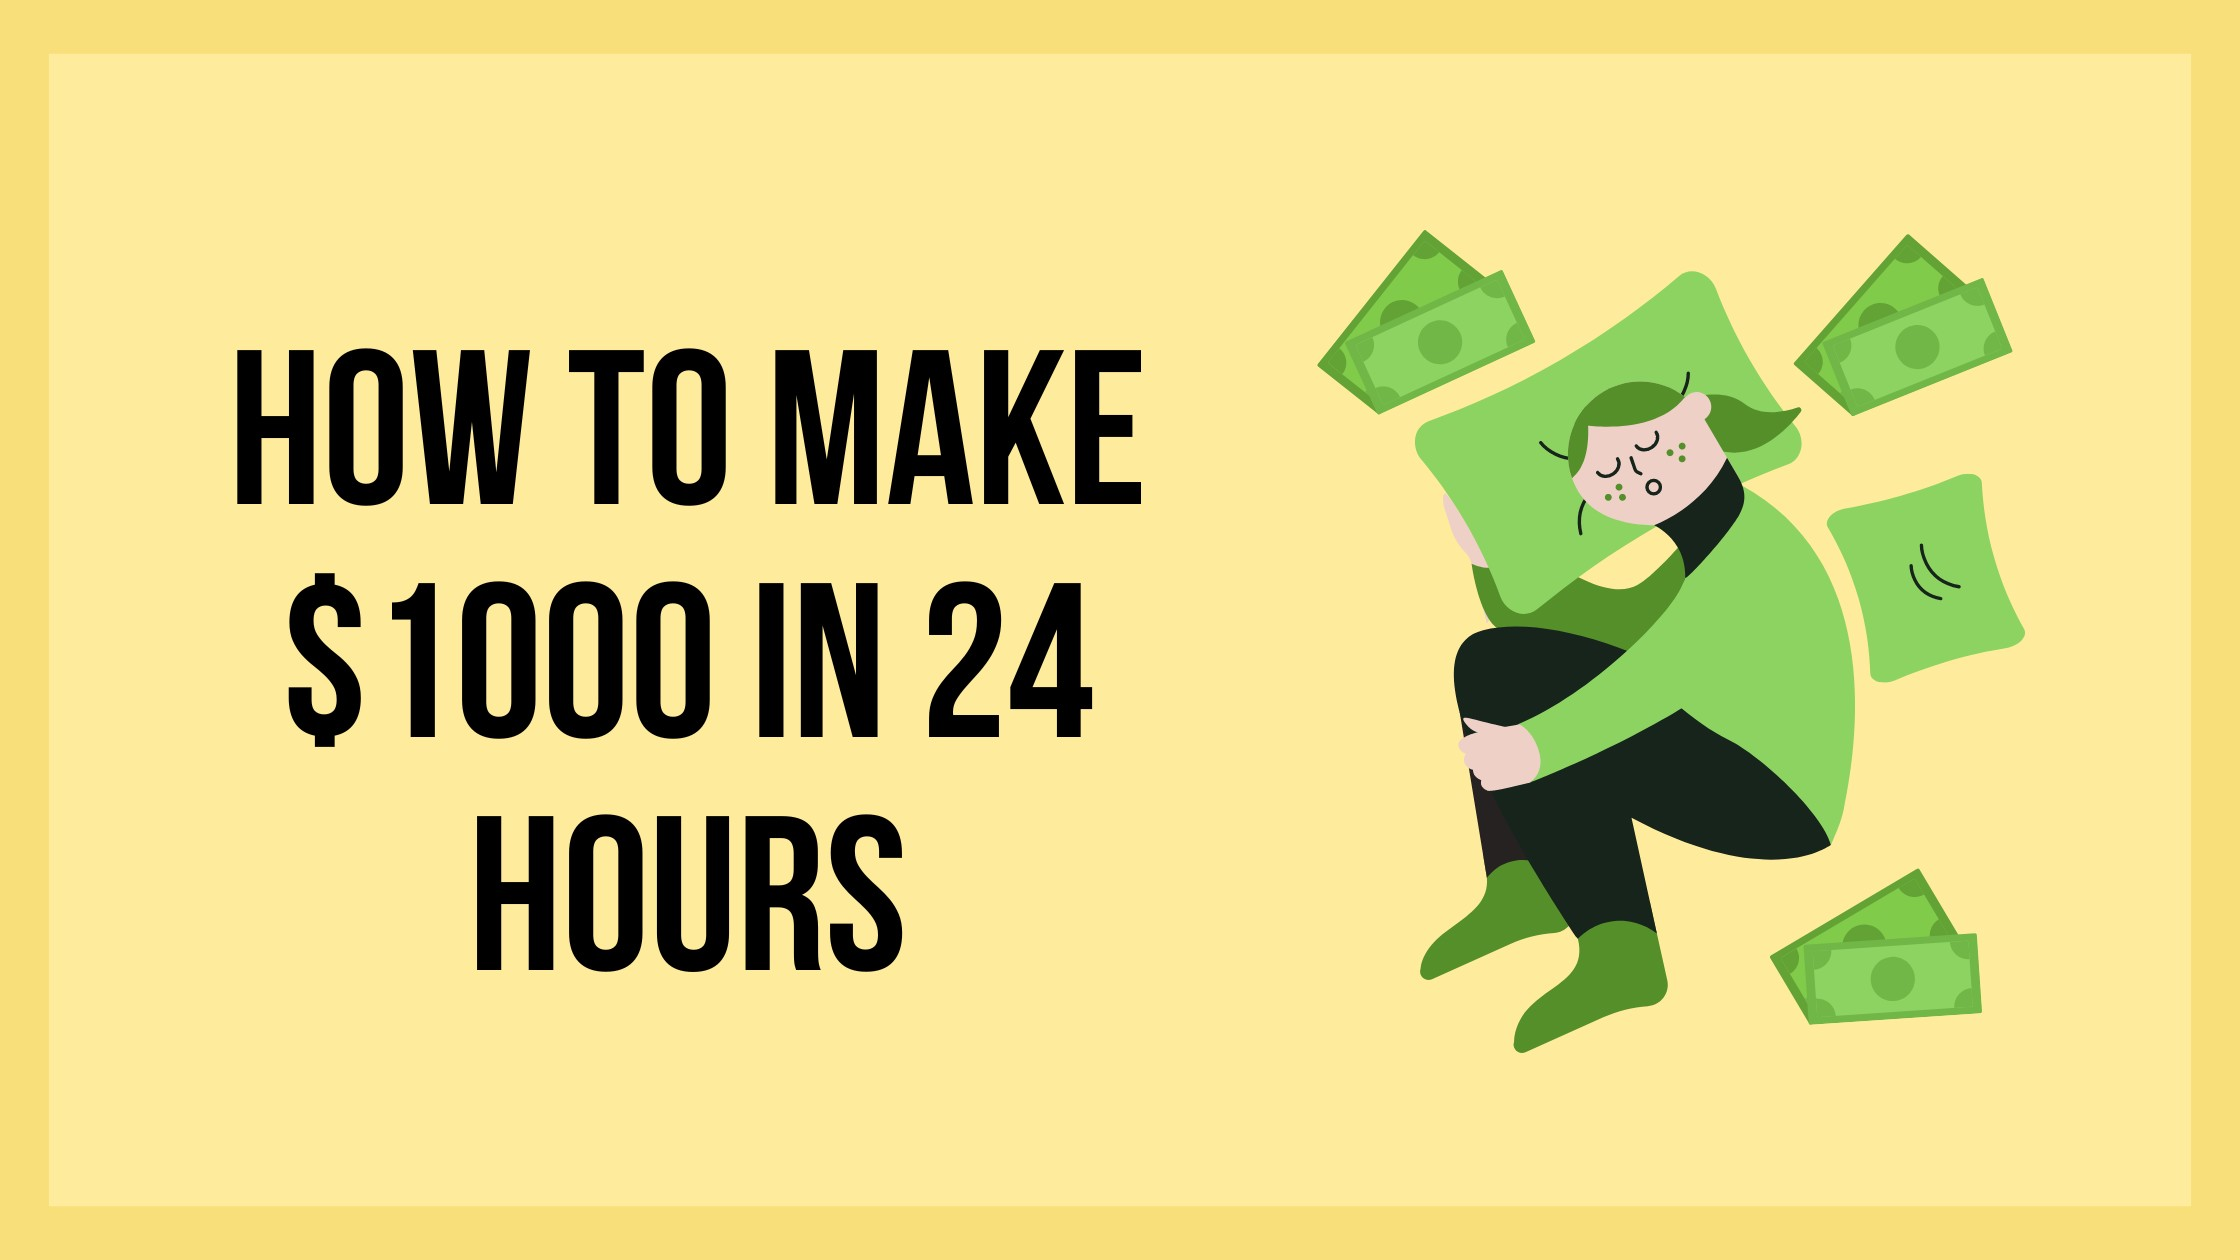 How To Make $1000 In 24 Hours?